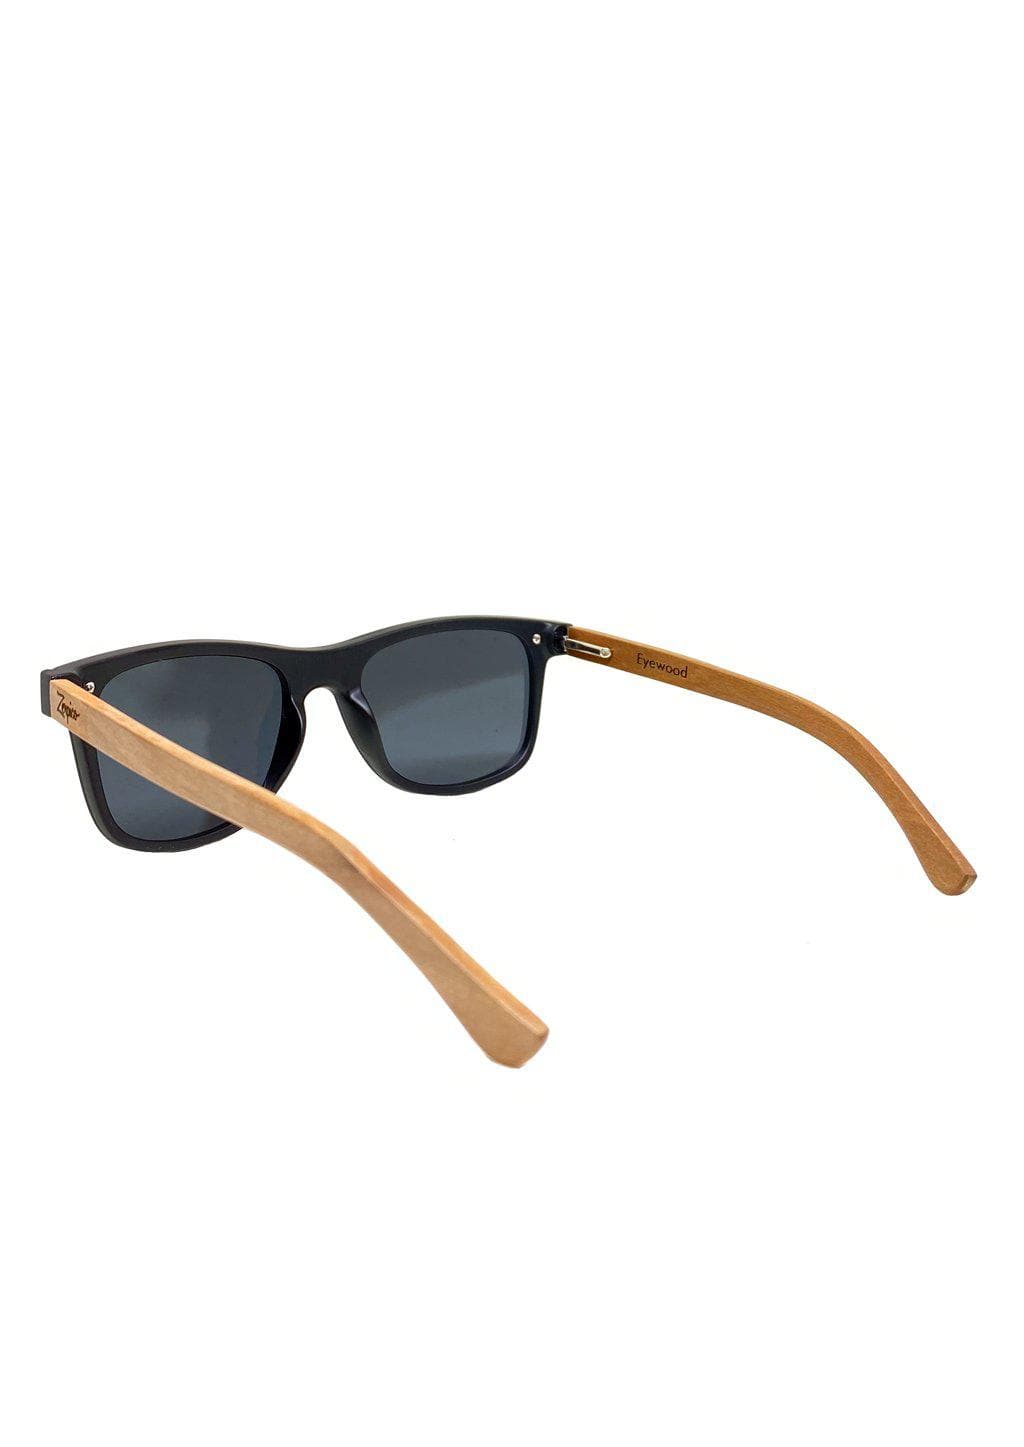 Eyewood tomorrow is our modern cool take on classic models. This is Taurus with black lenses. Nice wooden sunglasses. From back.